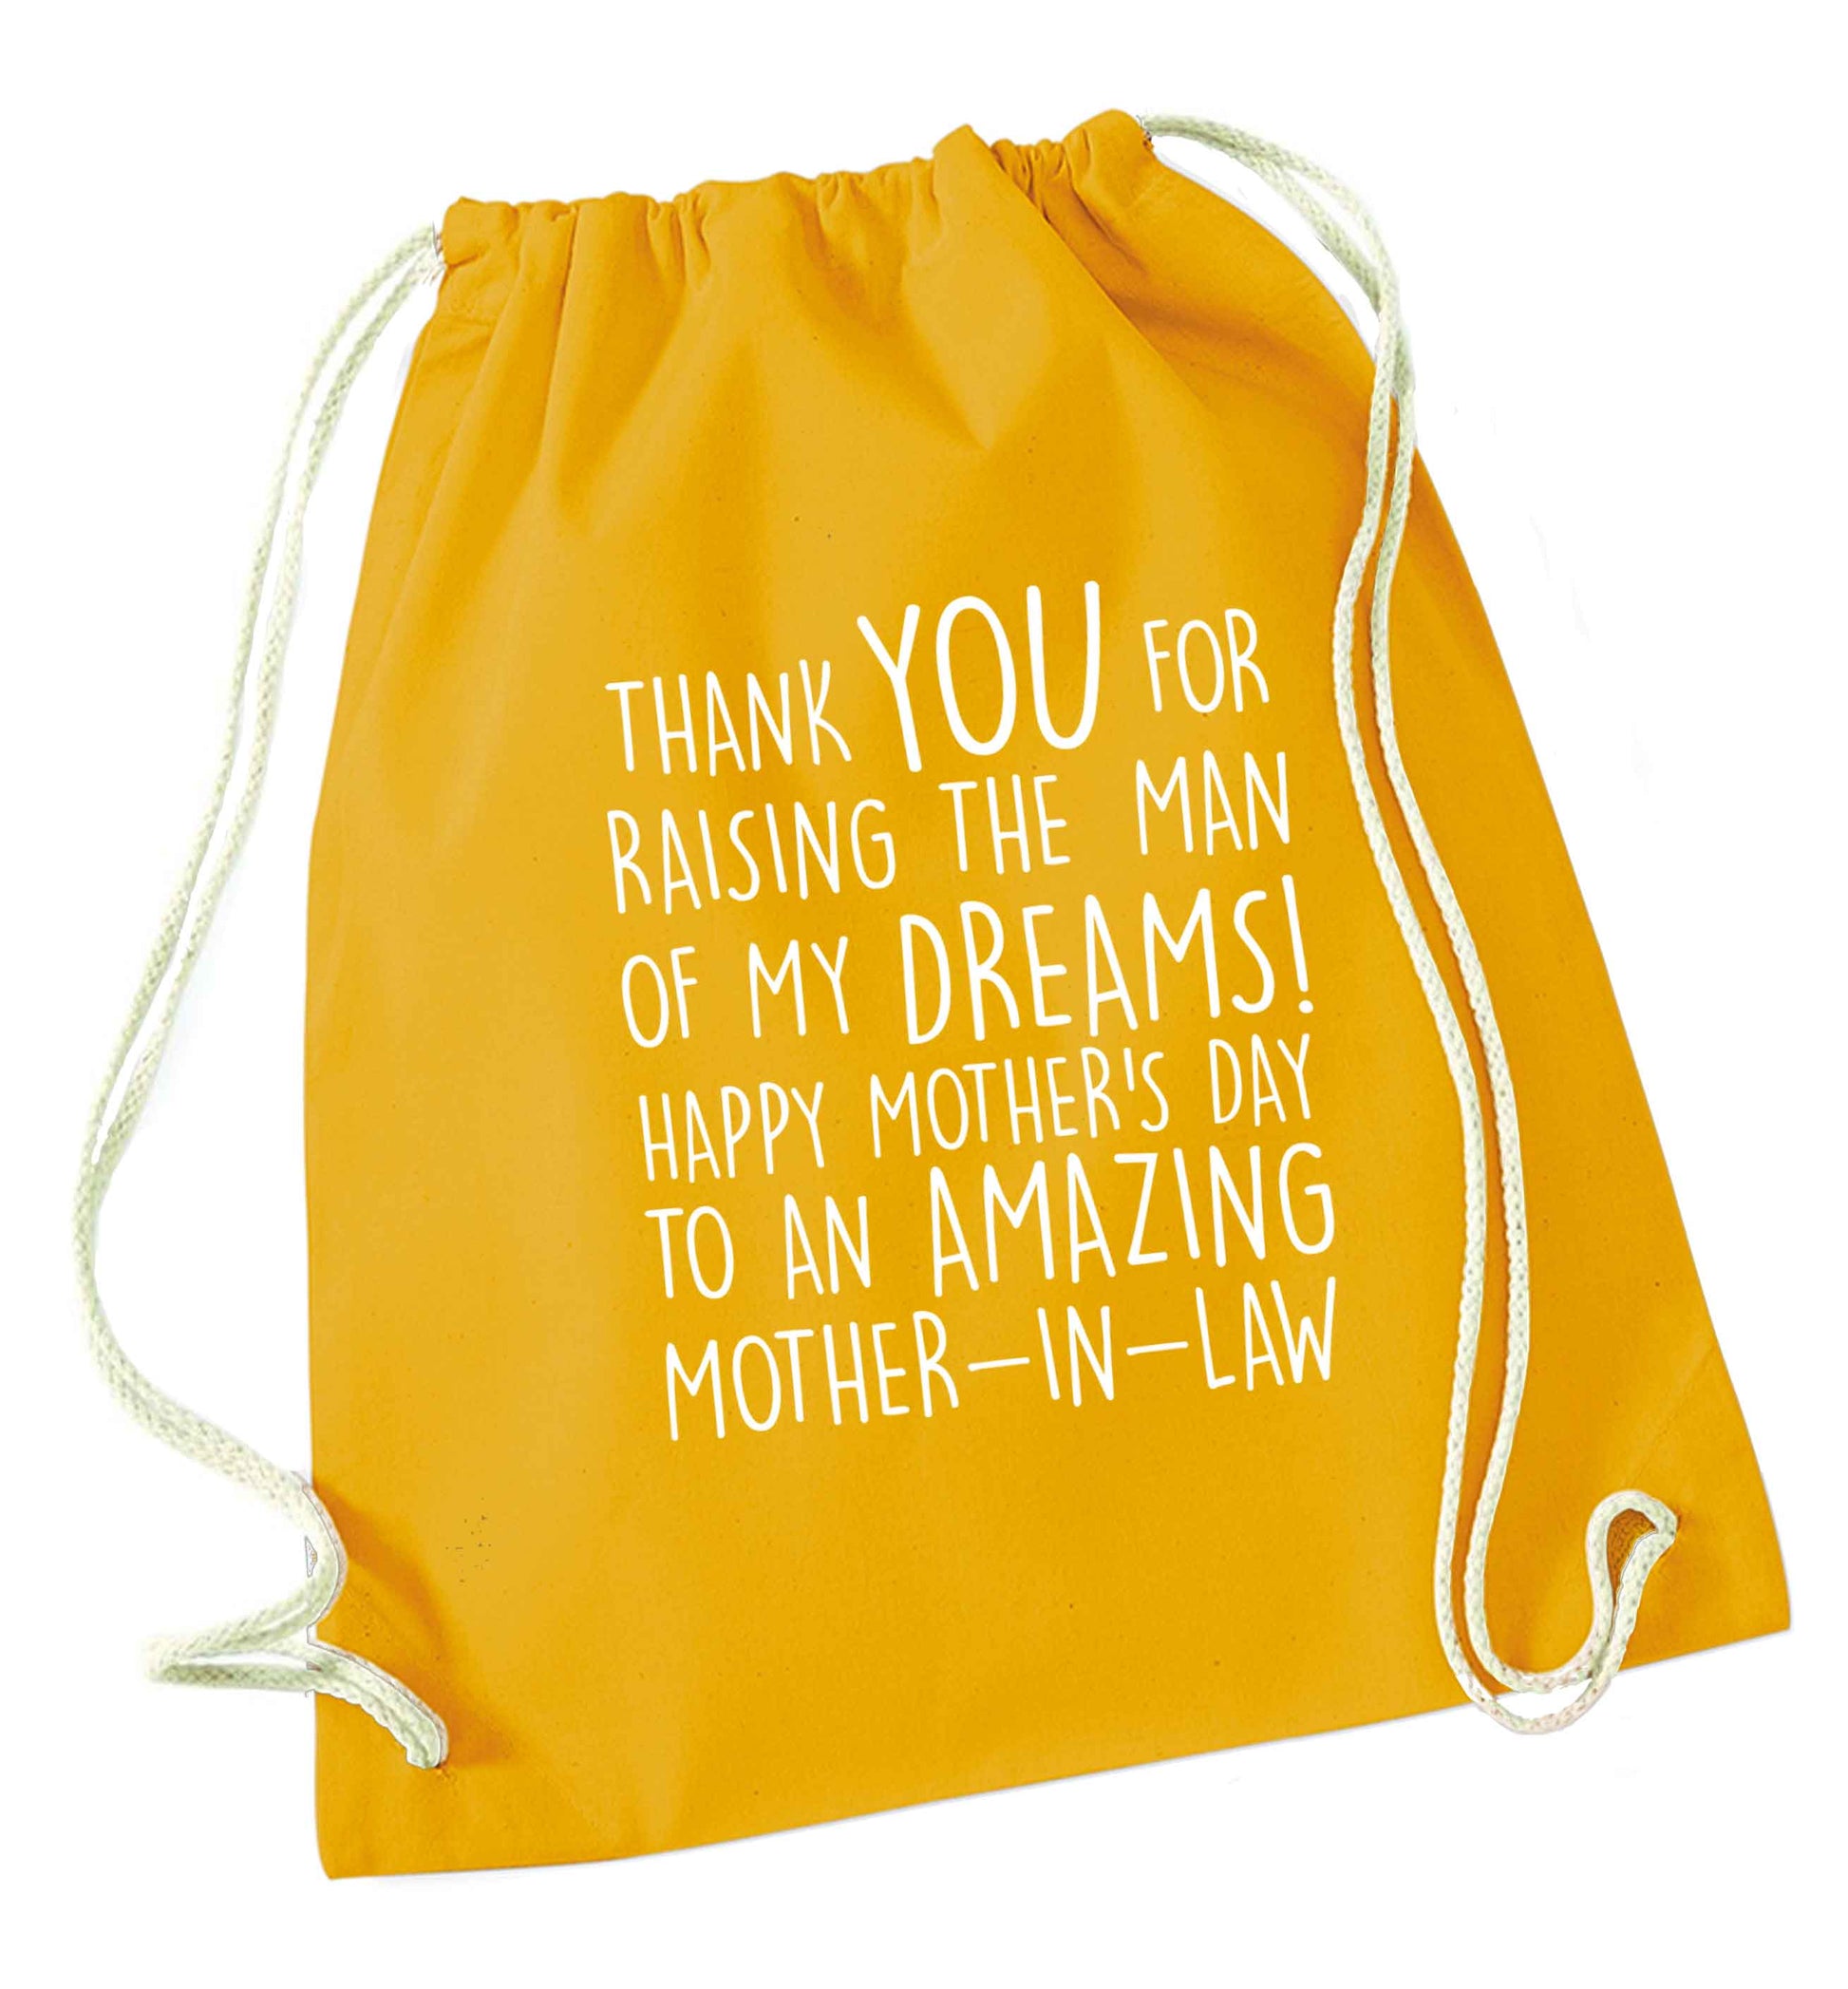 Raising the man of my dreams mother's day mother-in-law mustard drawstring bag